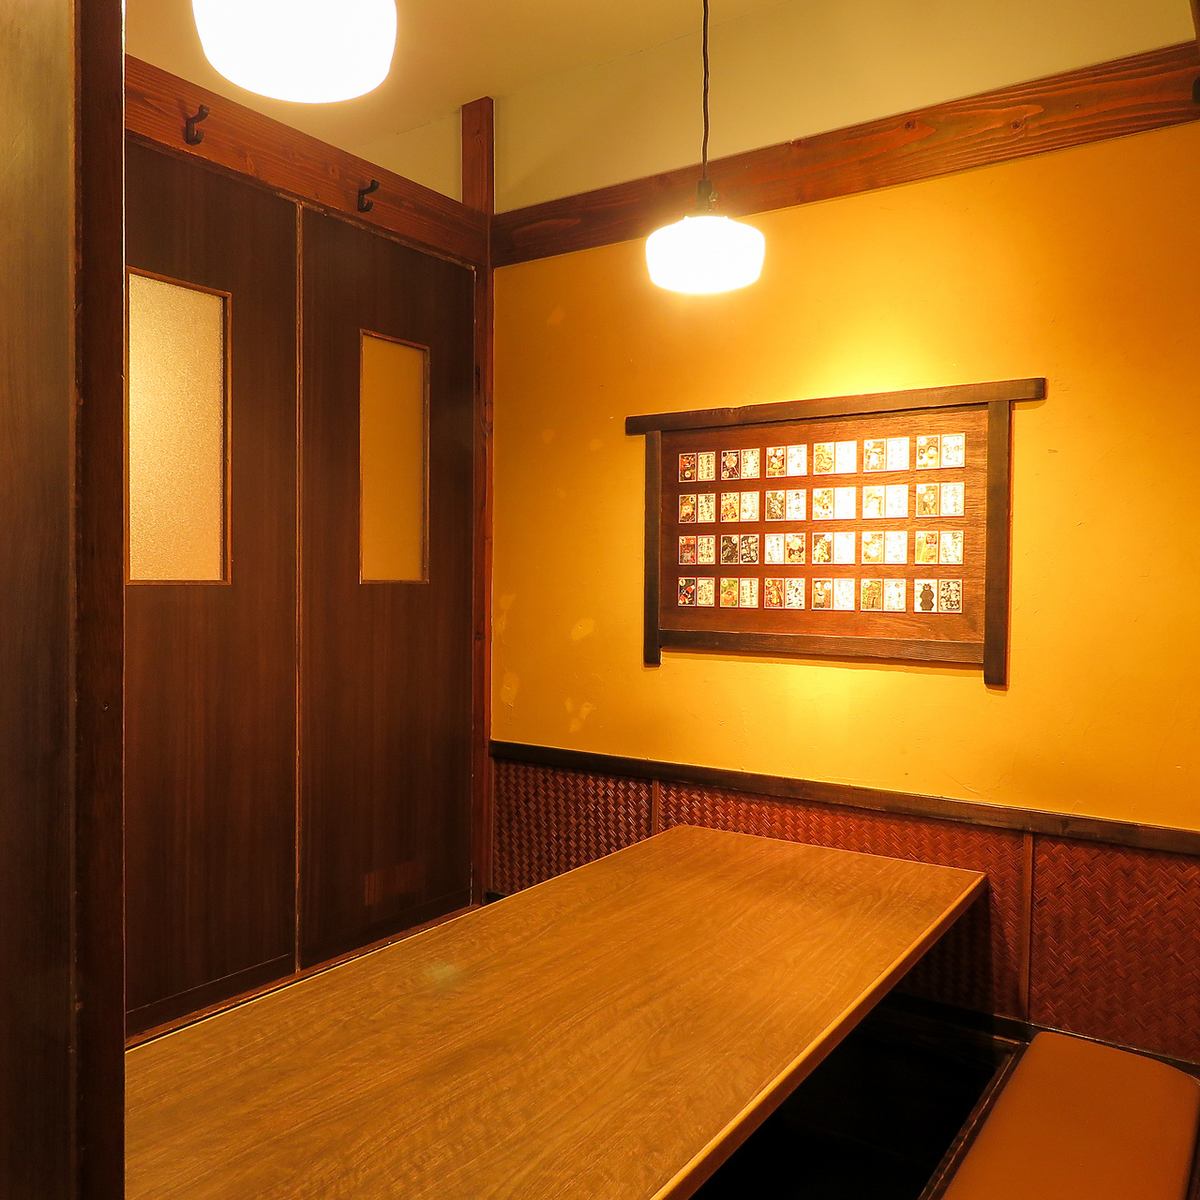 We have a private room with a sunken kotatsu ^^ Reservations are recommended!